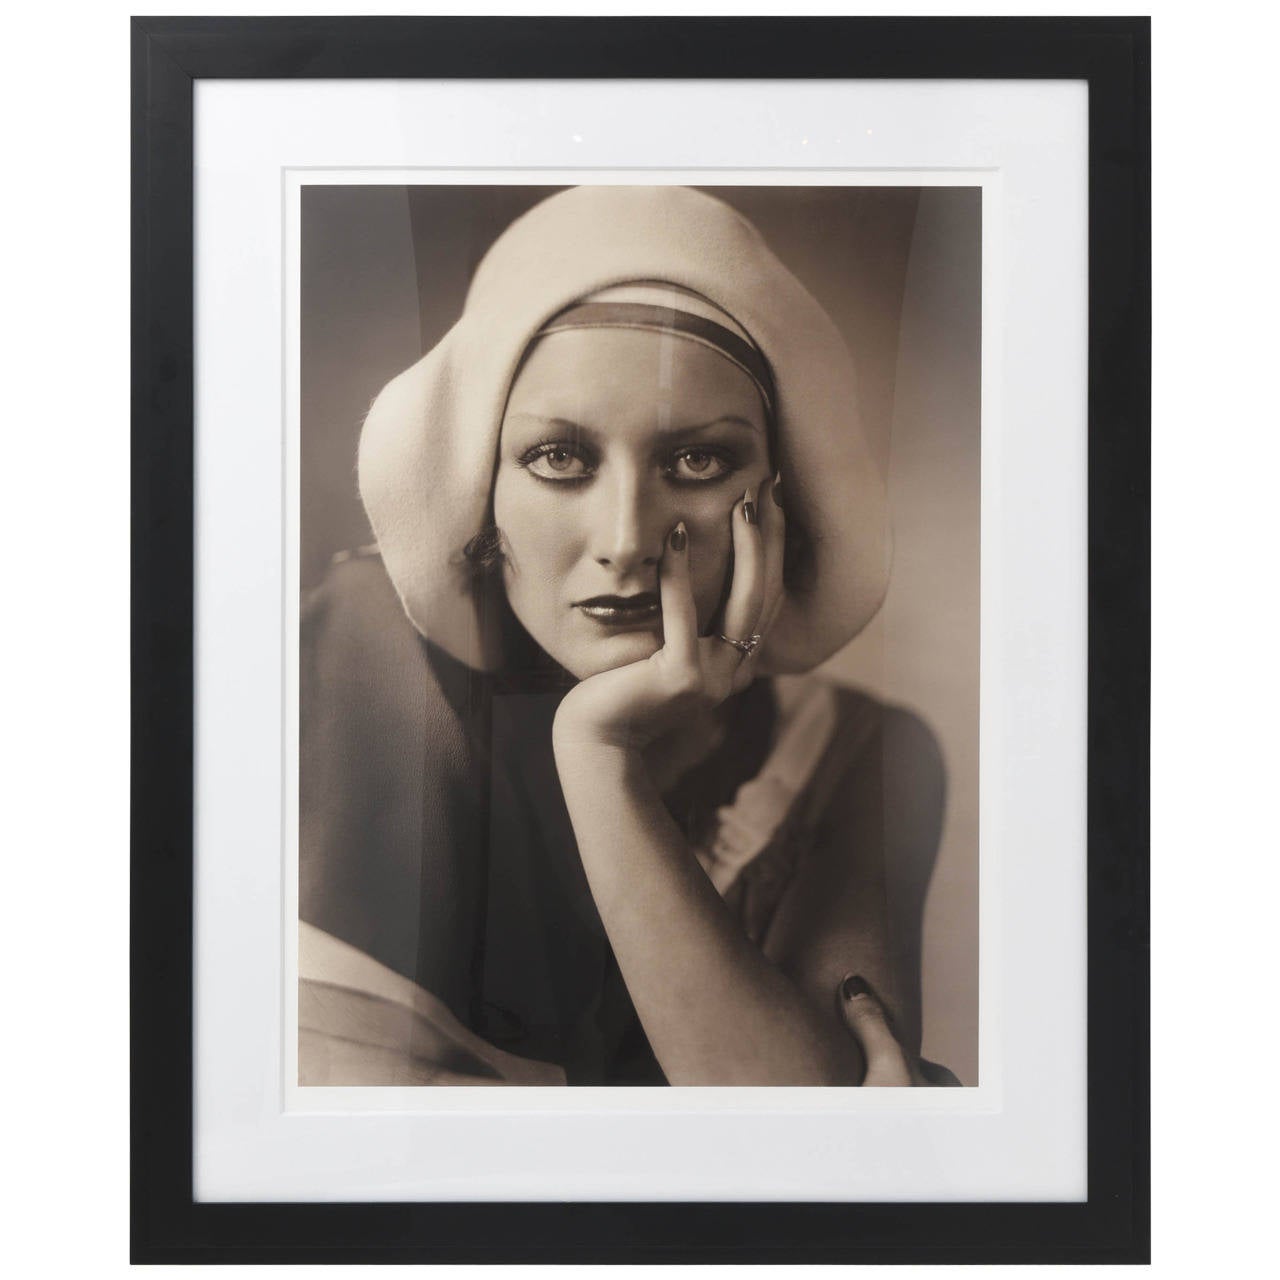 Large Scale, Framed Archival Pigment Print of Joan Crawford:  George Hurrell 193